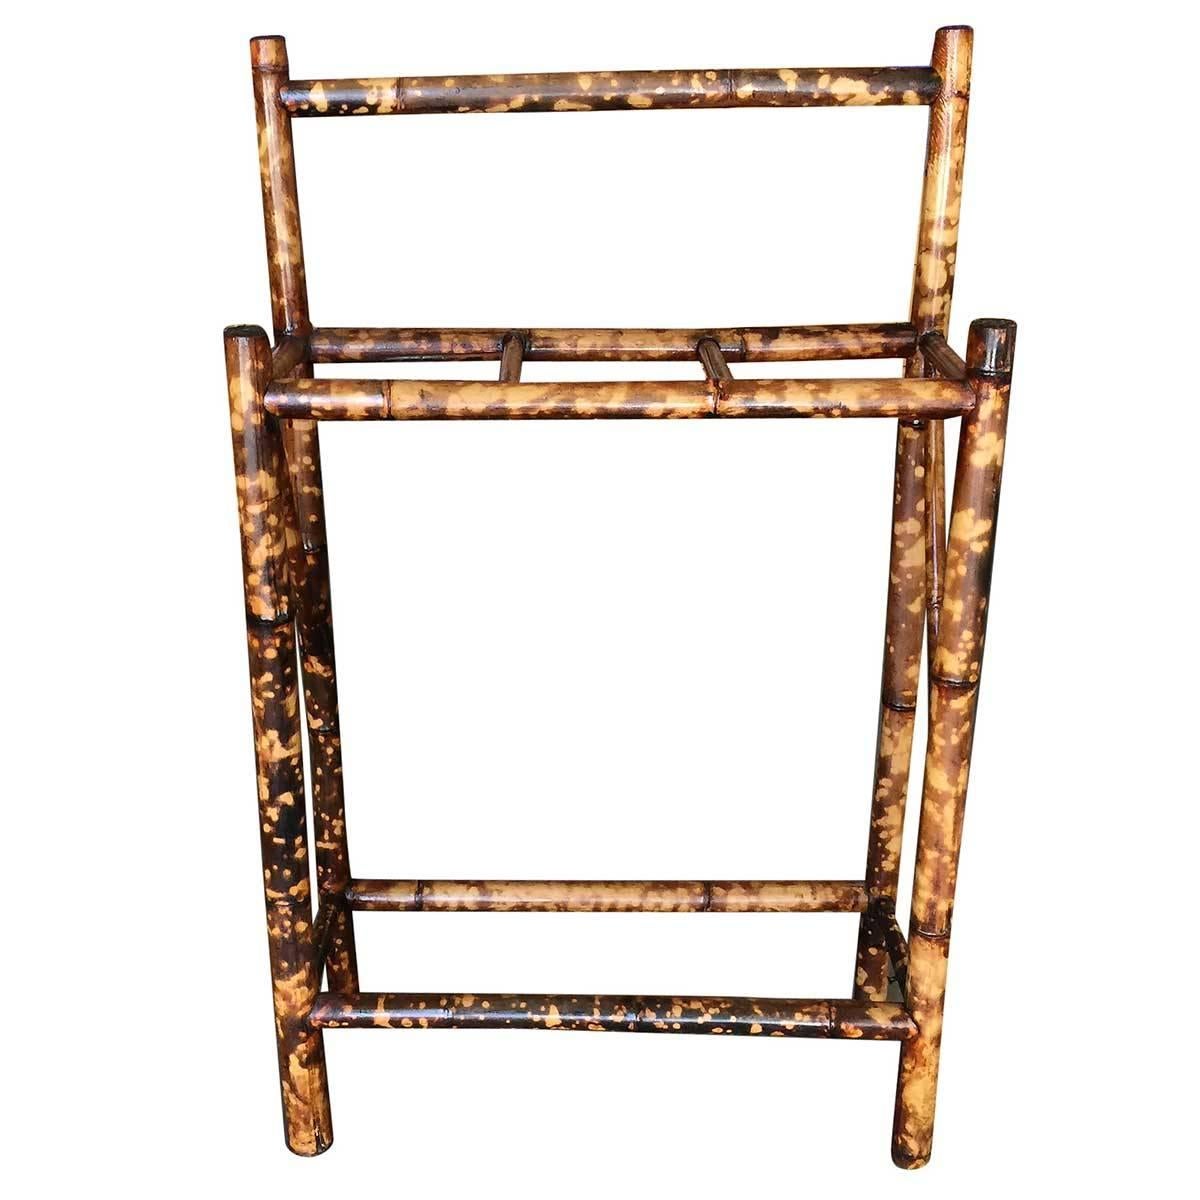 Antique tiger bamboo umbrella stand with back rail. The umbrella stand features three slots for storing umbrellas and canes.

Restored to new for you.

All rattan, bamboo and wicker furniture has been painstakingly refurbished to the highest